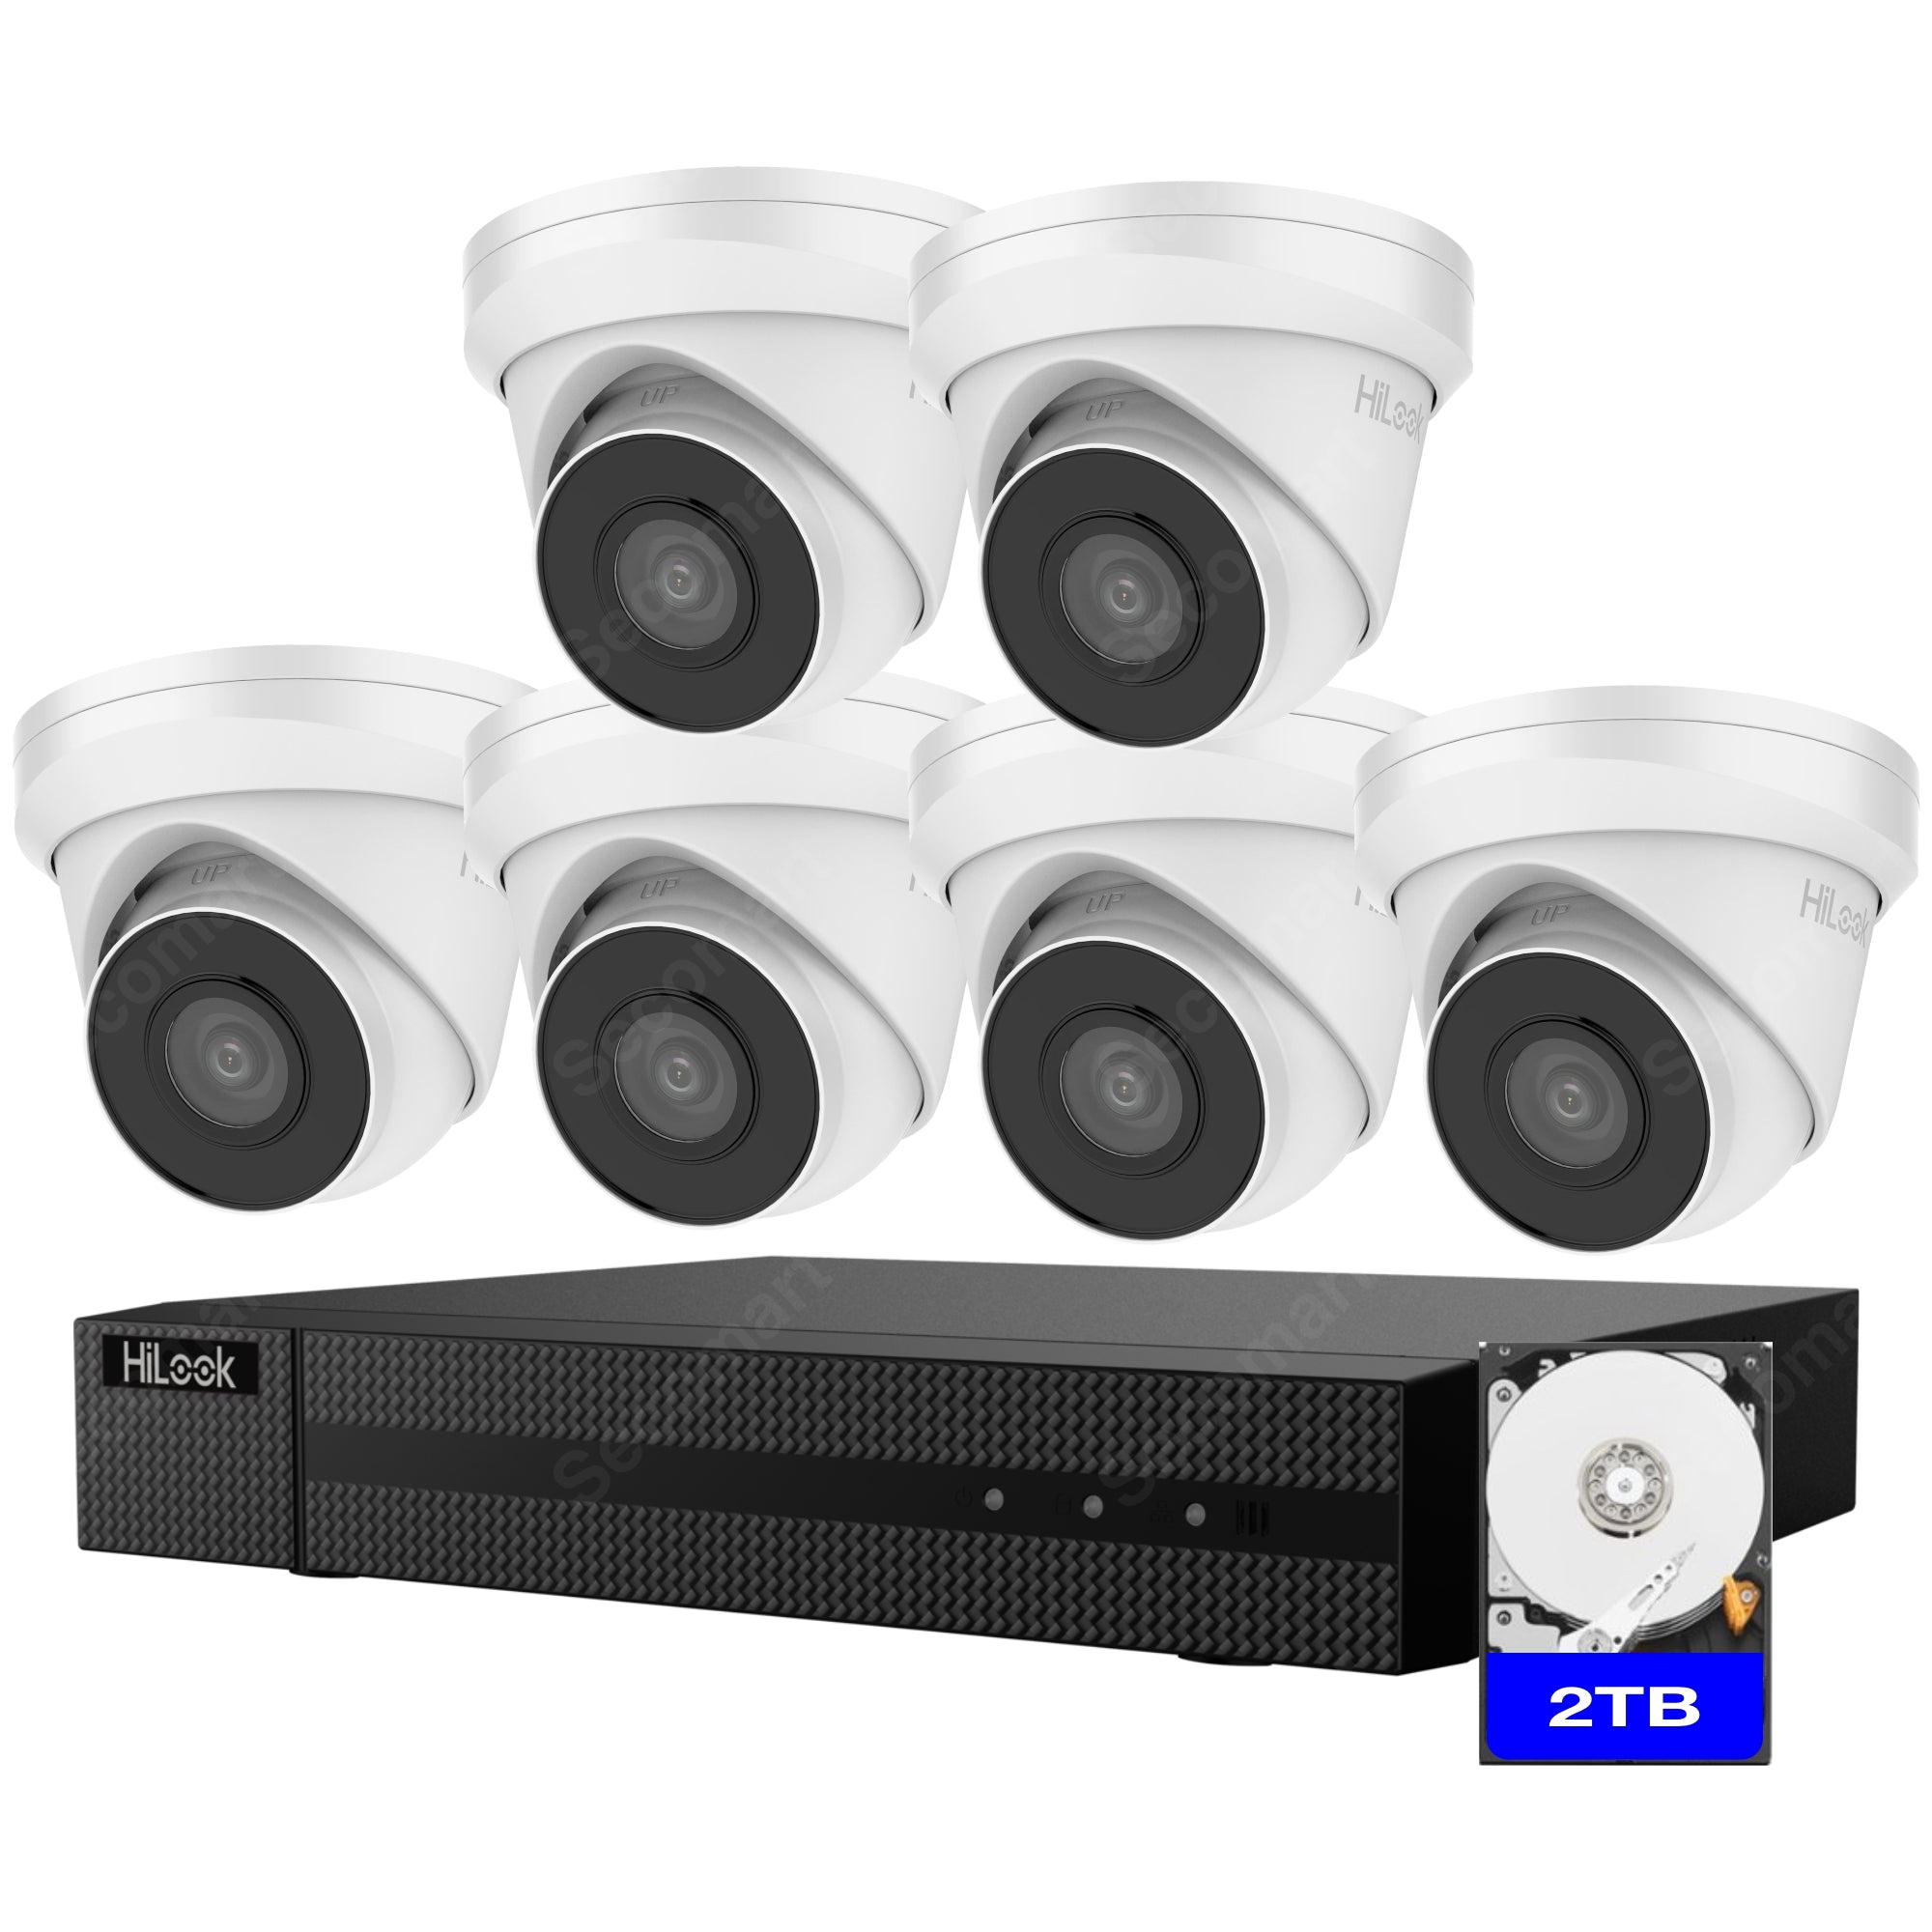 Hilook 4K Security Camera System, 6-Camera PoE NVR Surveillance Kit Outdoor 2TB DIY Wired Turret, Hilook by Hikvision